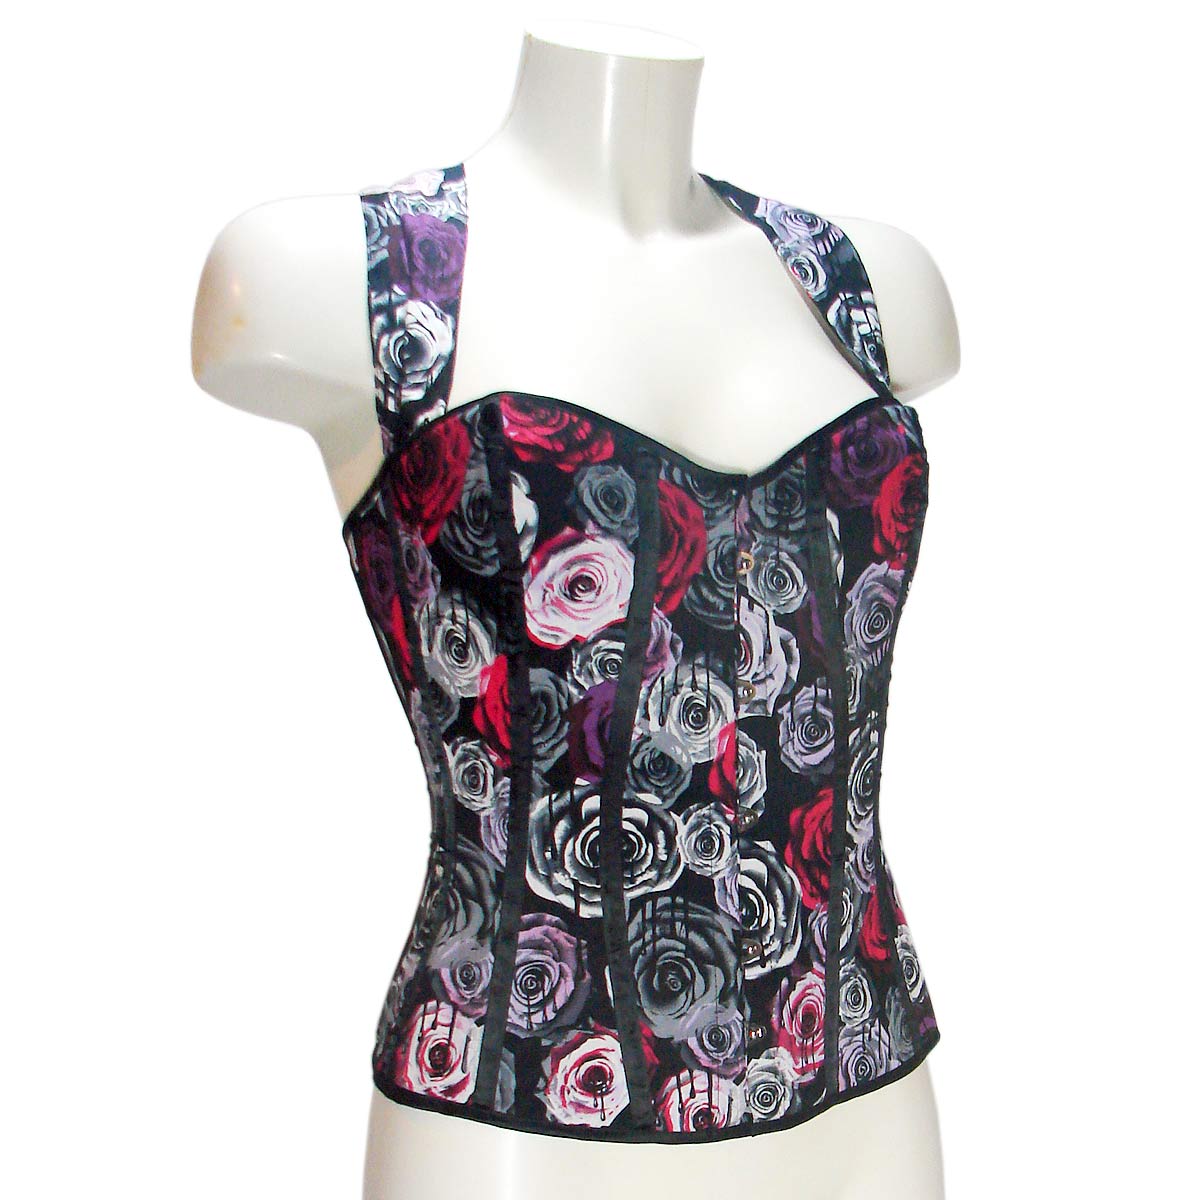 Corset Bodice Top Oi Oi Roses Print by Hell BunnyAnother Way of Life